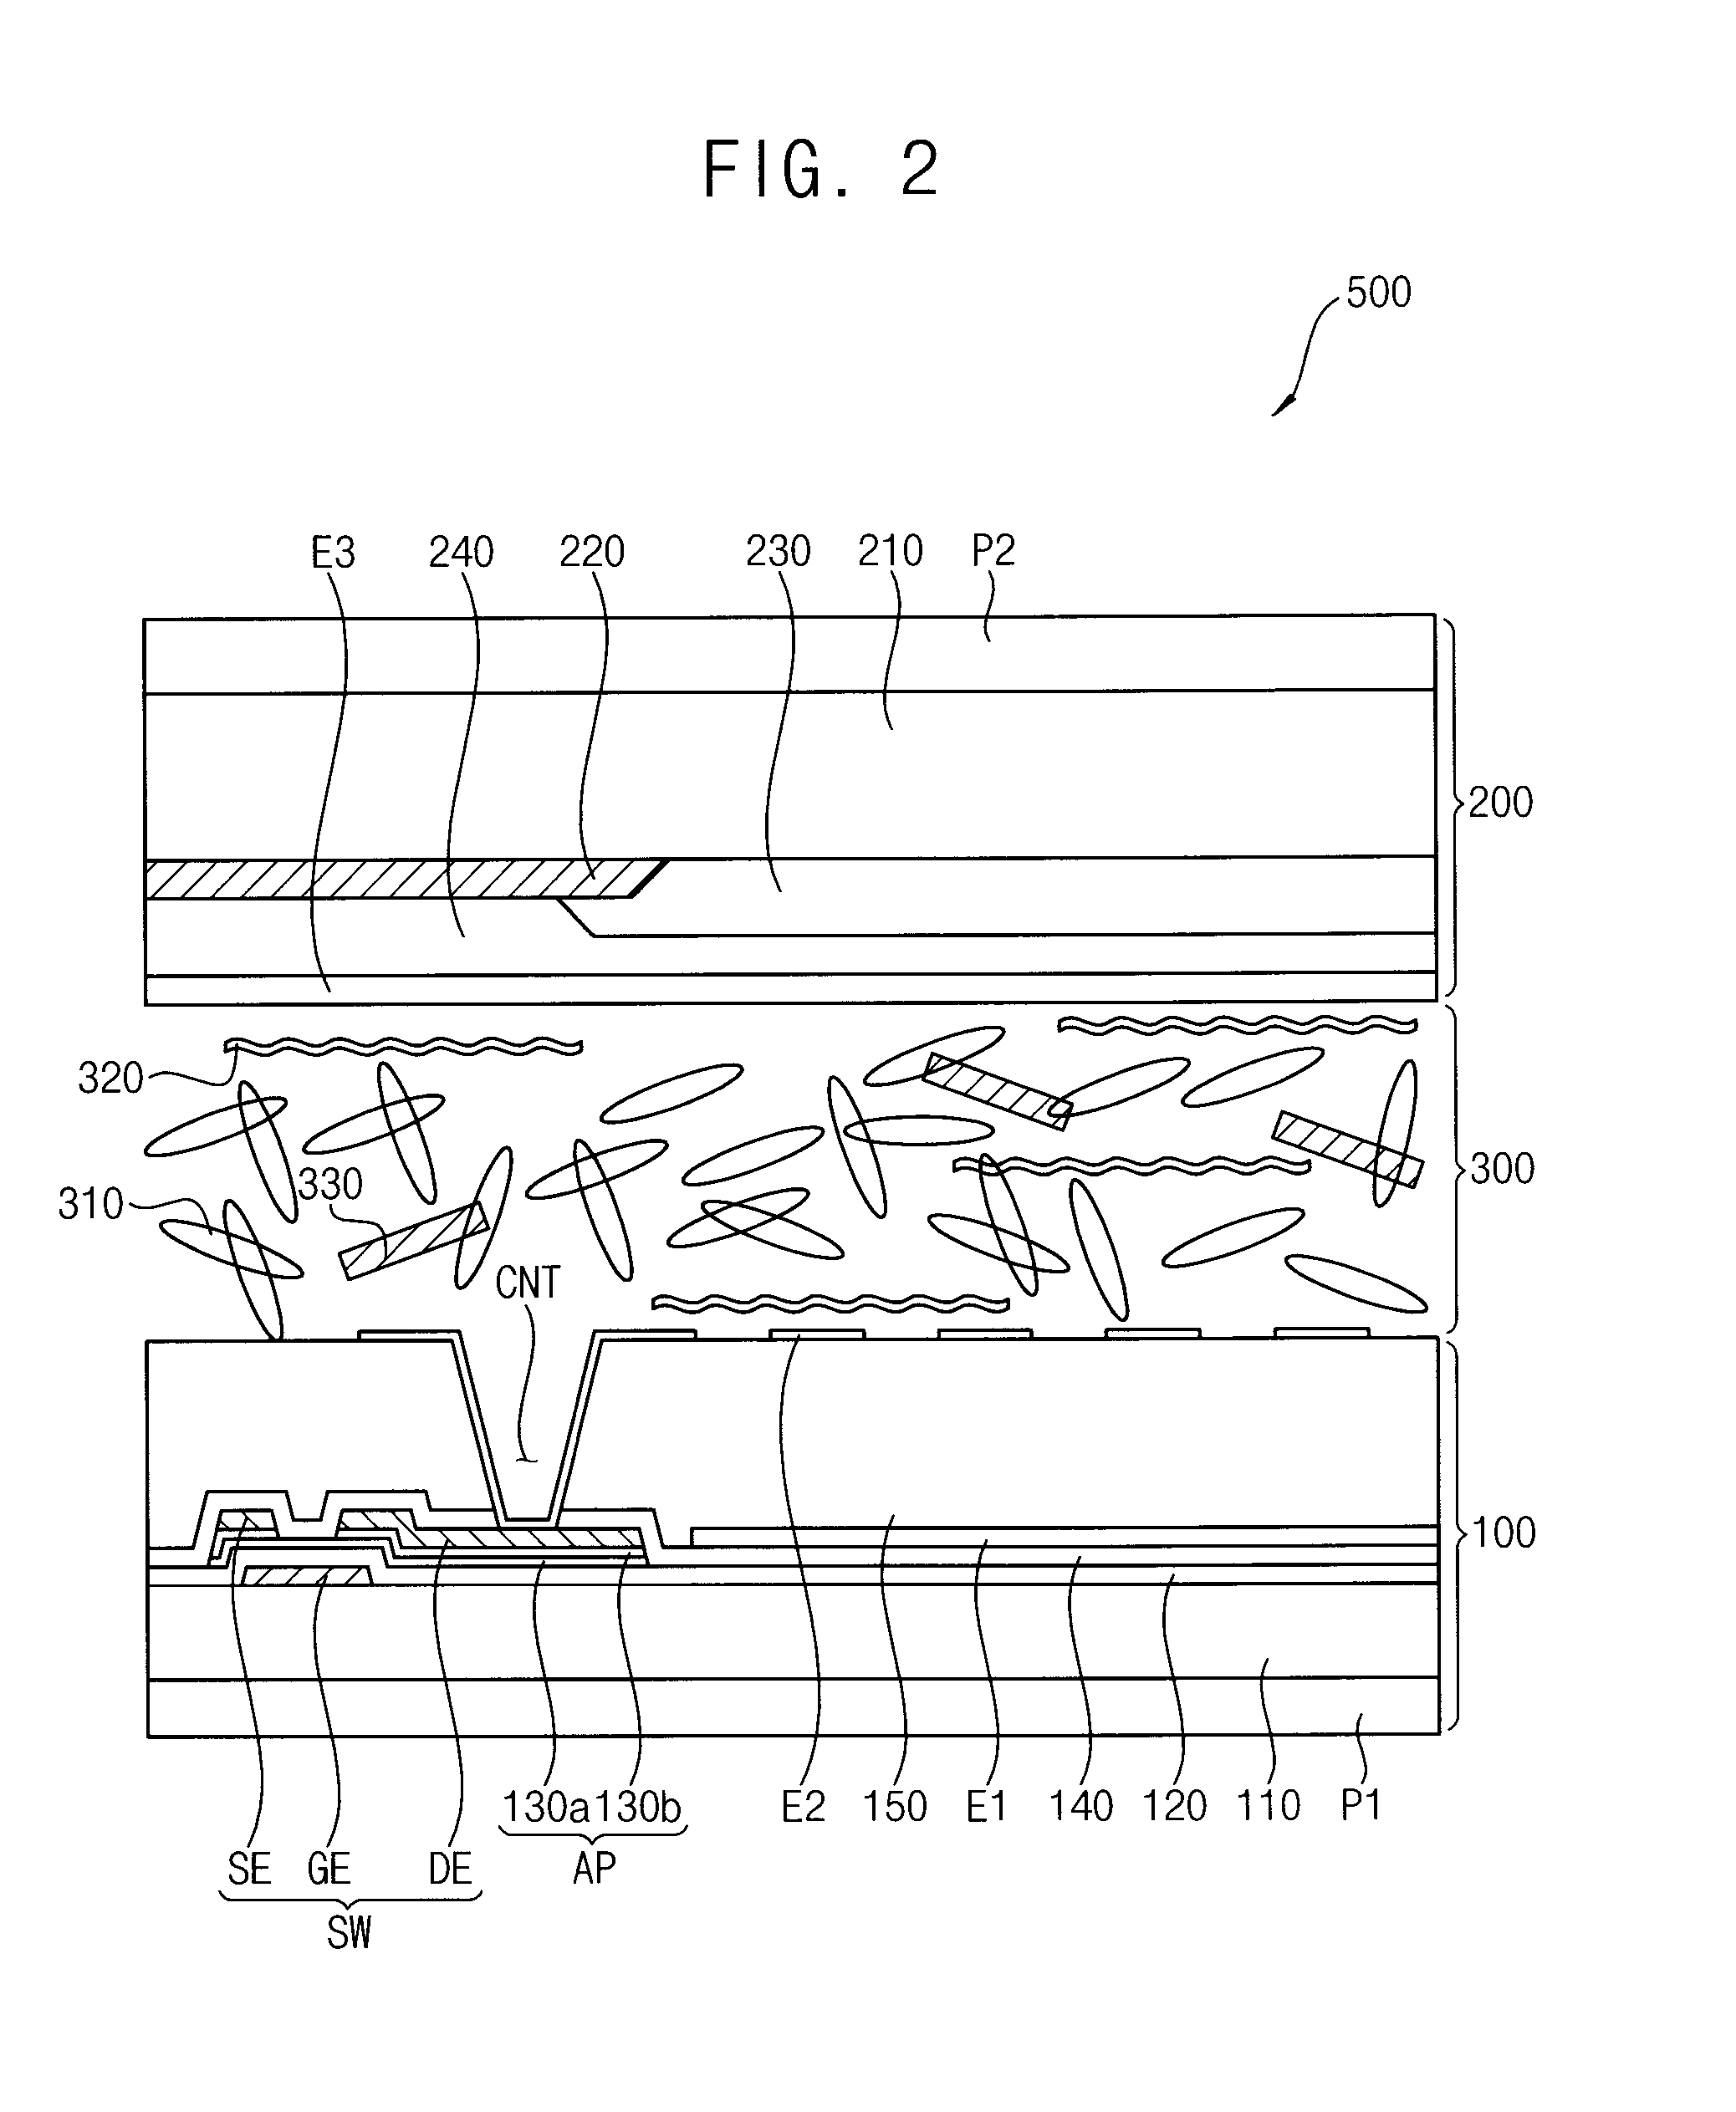 Display panel and method of manufacturing the display panel